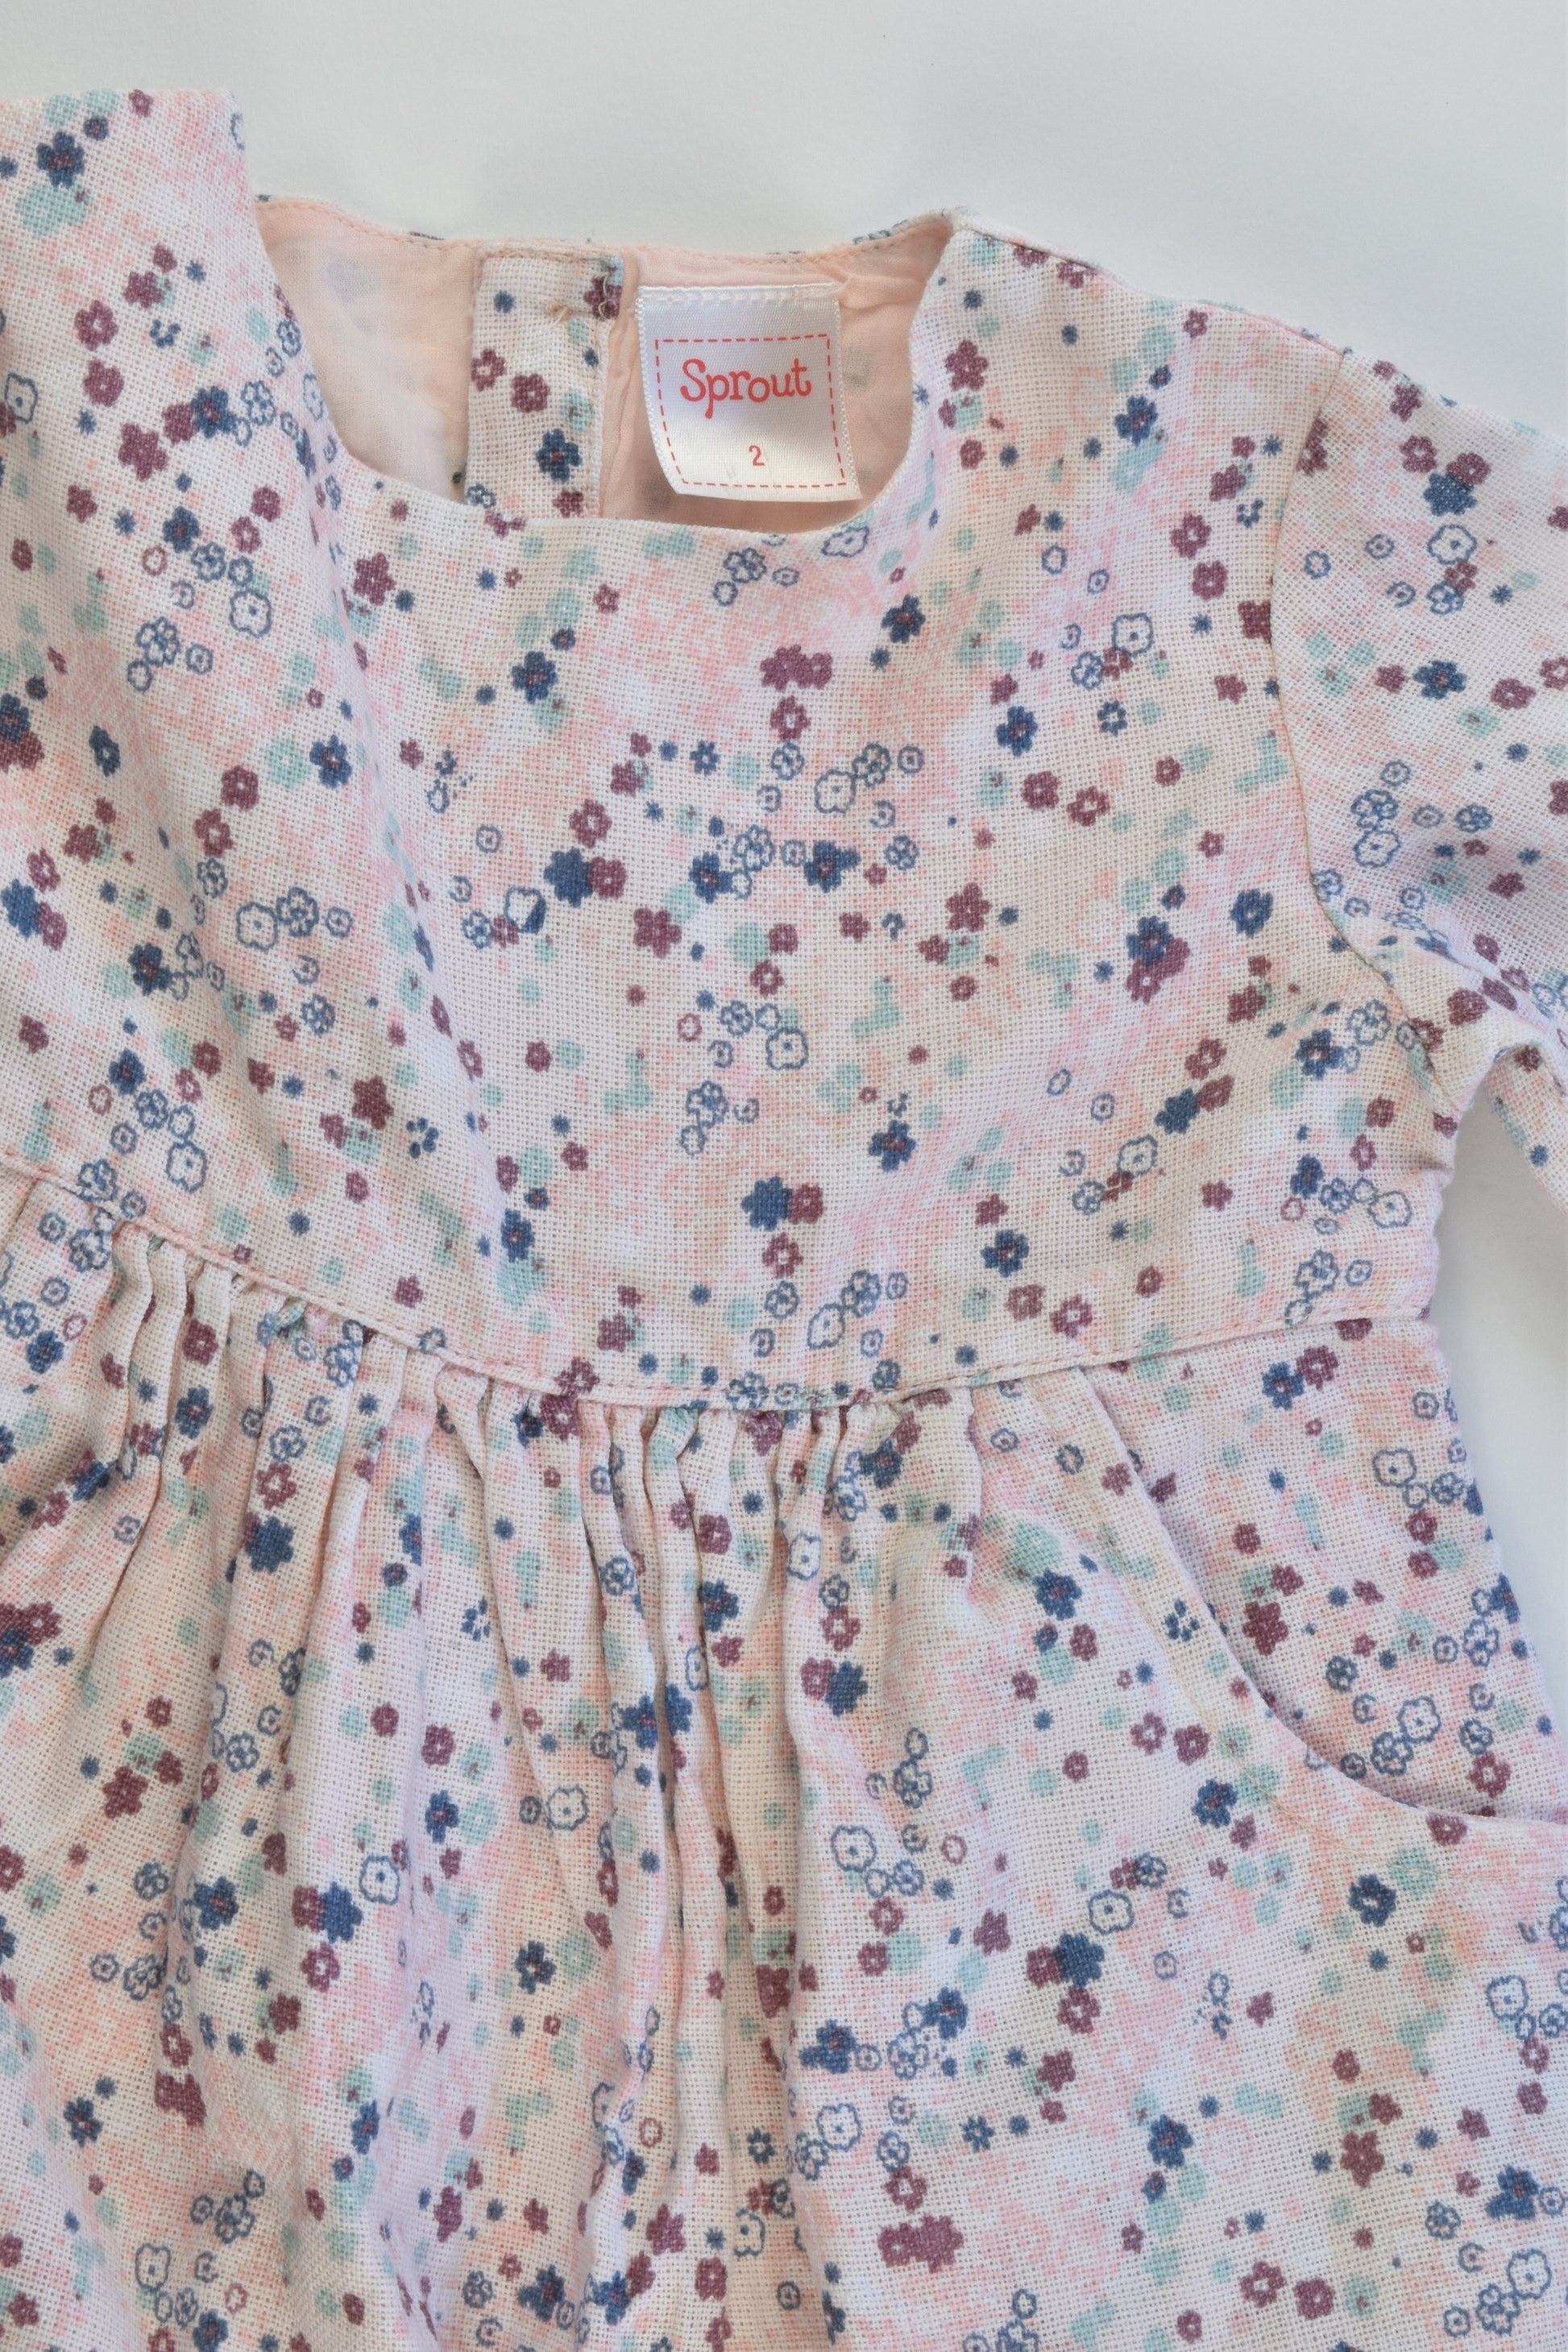 Sprout Size 2 Lined Floral Dress